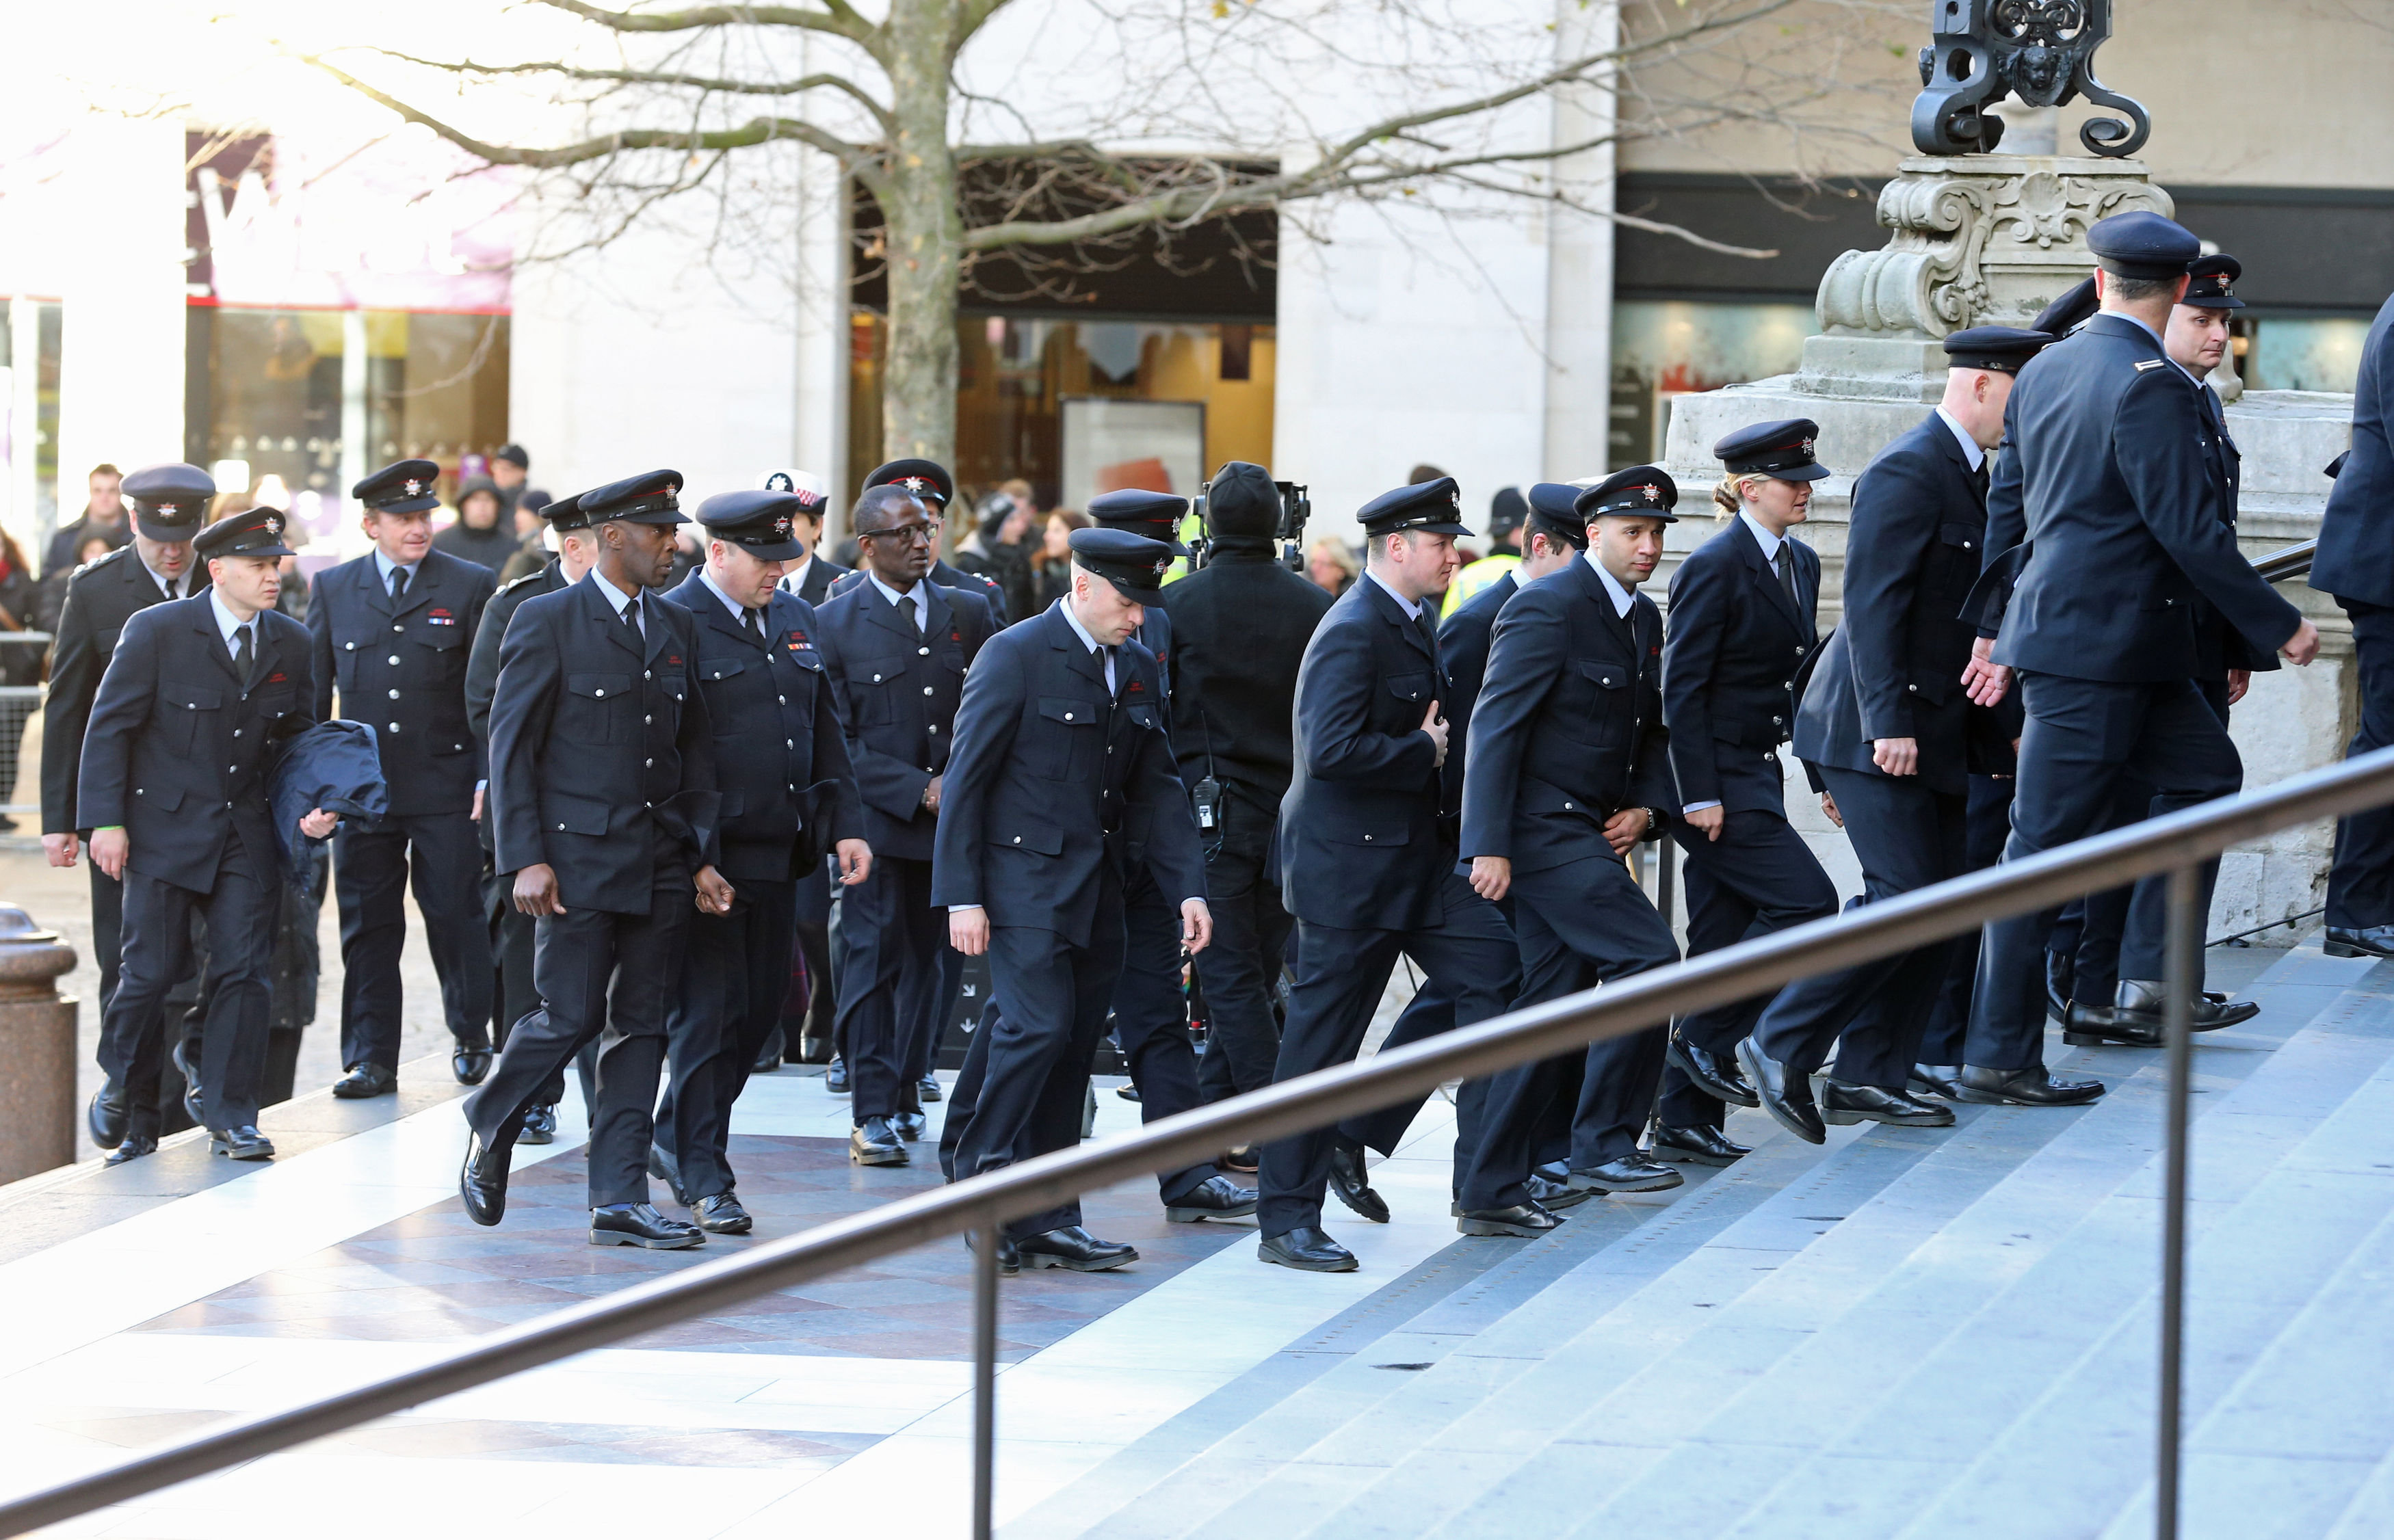 <strong>Firefighters are among the crowd of 1,500 people in attendance at the service&nbsp;</strong>